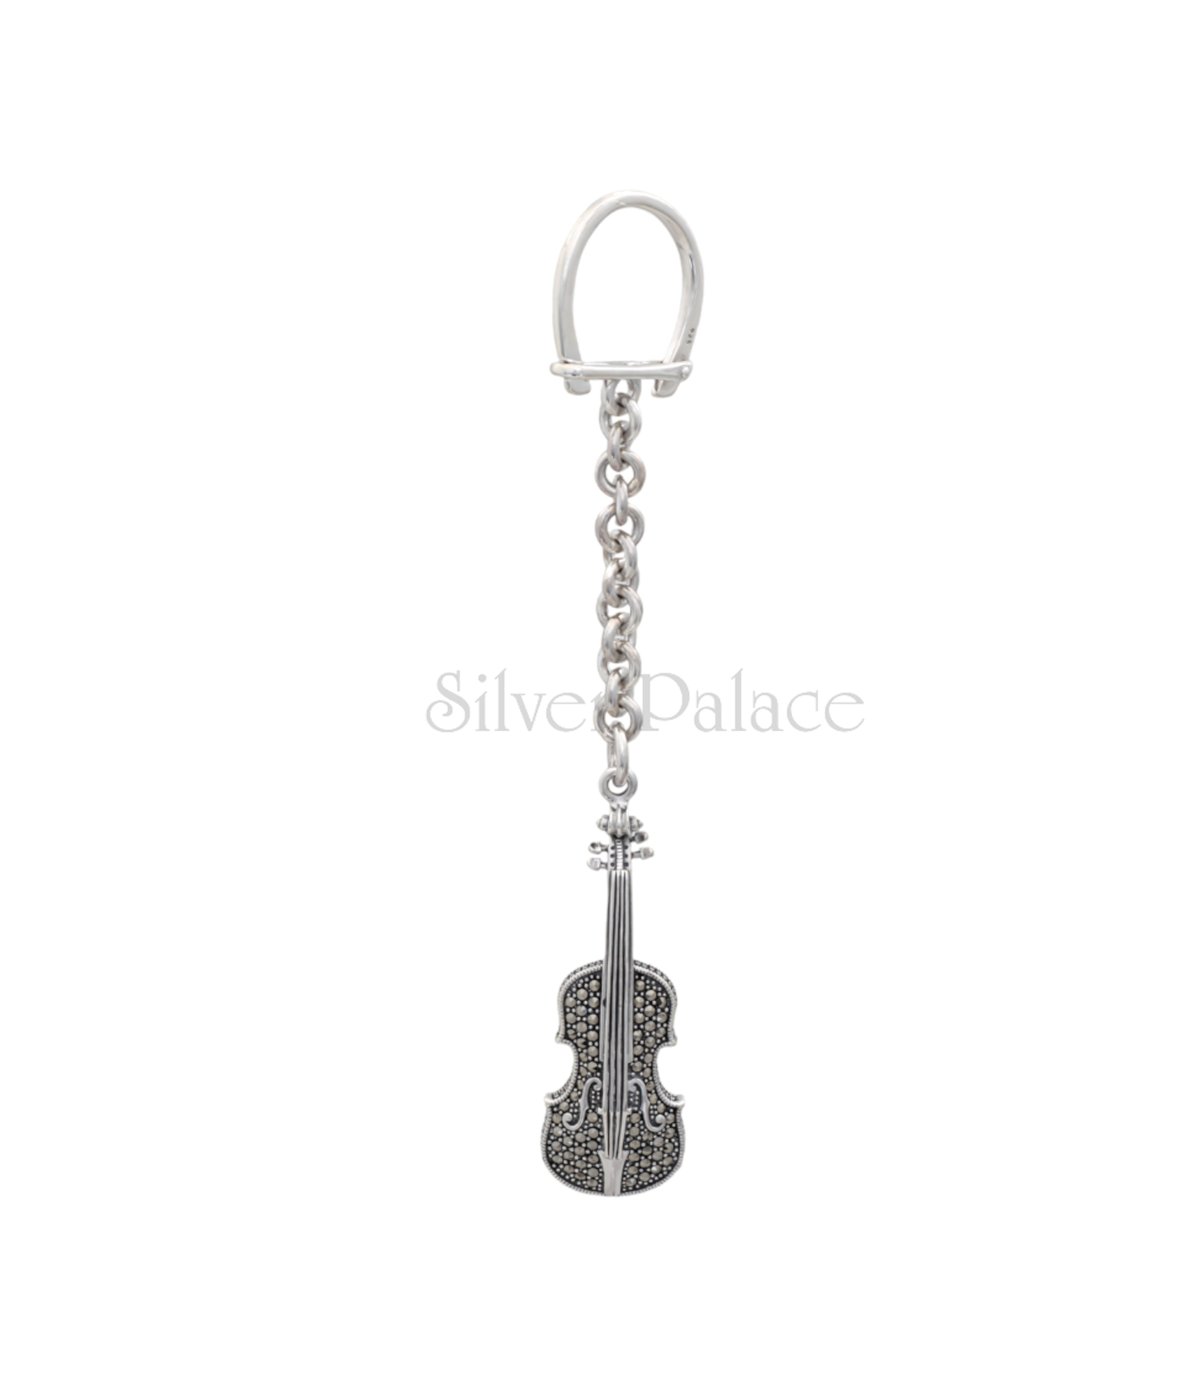 92.5 PURE SILVER VIOLIN KEYCHAIN FOR MUSIC LOVER